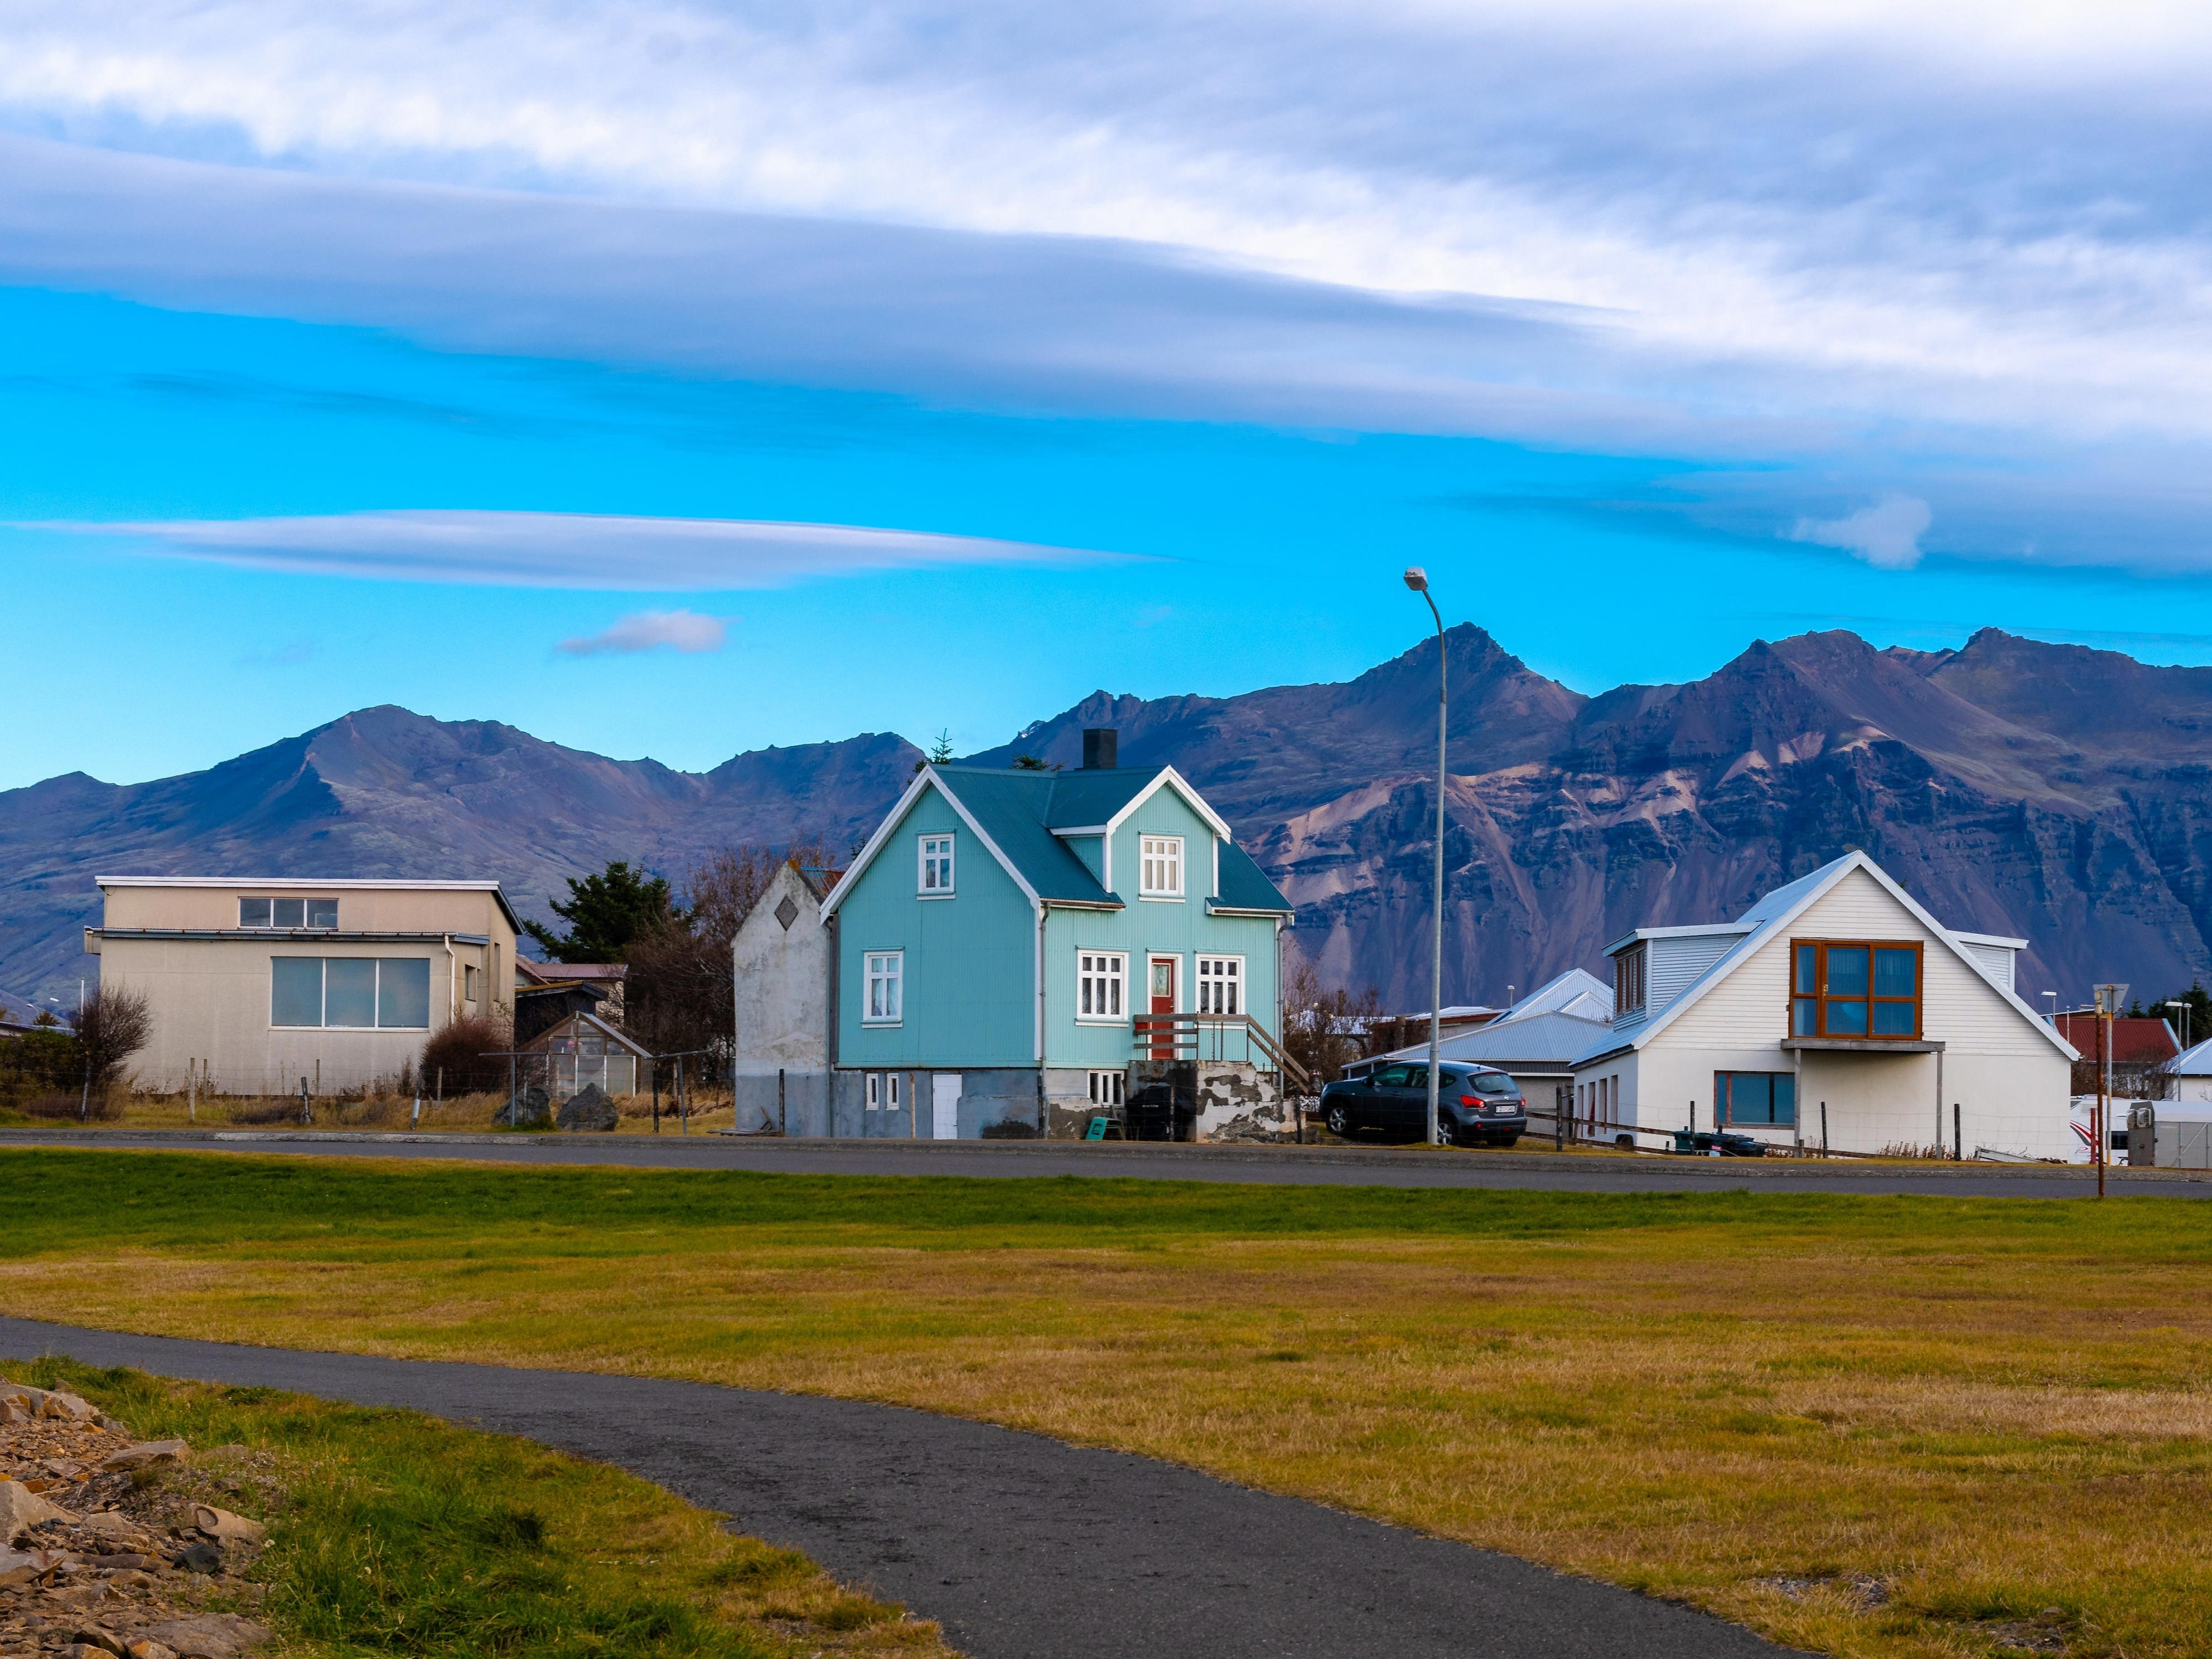 <p>Iceland can be an expensive destination to visit, across all of its regions. It can be cheaper if you avoid visiting during the summer, which is the most popular season for tourists and when prices for hotels and activities can spike.</p><p>As a small fishing town of about <a href="https://visitvatnajokull.is/taste-of-vatnajokull/hofn-and-the-lobster-festival/" rel="noopener nofollow sponsored">1,800 people,</a> Höfn is an outdoorsy option for visiting Iceland on a $500 budget. It's located on the southeastern coast, and has beaches and nature trails to explore.</p><p>In terms of where to stay, you can get a rugged Icelandic experience by staying at <a href="https://affiliate.insider.com?h=9944020c03fac1dc849abc4ec07e0531302588789dfbe05d82f0cdced0c3fc80&platform=msn_reviews&postID=642ade21ba755654617ced15&site=in&u=https%3A%2F%2Fwww.booking.com%2Fhotel%2Fis%2Fhofn-cottages.en-us.html%3Faid%3D382845%26label%3Daffnetawin-index_pub-257137_site-_pname-Business%2520Insider_plc-_ts-in_646548c28c8a4f2c267c6086_browser_undefined_clkid-6776_1684362083_84b1c3a50b39504d323648f8f50c5f3e%26sid%3D1668ad5c7018be34150fd00594fce3d0%26checkin%3D2023-05-30%3Bcheckout%3D2023-05-31%3Bdest_id%3D-2646664%3Bdest_type%3Dcity%3Bdist%3D0%3Bgroup_adults%3D2%3Bgroup_children%3D0%3Bhapos%3D1%3Bhpos%3D1%3Bno_rooms%3D1%3Breq_adults%3D2%3Breq_children%3D0%3Broom1%3DA%252CA%3Bsb_price_type%3Dtotal%3Bsoh%3D1%3Bsr_order%3Dpopularity%3Bsrepoch%3D1684362087%3Bsrpvid%3Df4f09d322ef60013%3Btype%3Dtotal%3Bucfs%3D1%26%23no_availability_msg&utm_source=msn_reviews" rel="noopener">Höfn Cottages</a>, a group of tiny-home cottages. A two-night stay costs about $200, according to <a href="https://affiliate.insider.com?h=dca3f3de1a9359b18ea1eccf2d3b5a9b9c981466a30b33be9e0cf4cfbeea5d17&platform=msn_reviews&postID=642ade21ba755654617ced15&site=in&u=https%3A%2F%2Fwww.booking.com%2Fhotel%2Fis%2Fhofn-cottages.html%3Faid%3D318615%26label%3DNew_English_EN_NY%253A_New_York_State_23537688865-3HhLaepAvUOrD5Rz7Hri%2AwS640938665678%253Apl%253Ata%253Ap1%253Ap2%253Aac%253Aap%253Aneg%253Afi%253Atidsa-64415224945%253Alp9067609%253Ali%253Adec%253Adm%253Aag23537688865%253Acmp363167905%26sid%3Dd4a030a9a8b25c7b2a1a6daaf40b1db6%26sb%3D1%26src%3Dhotel%26src_elem%3Dsb%26error_url%3Dhttps%253A%252F%252Fwww.booking.com%252Fhotel%252Fis%252Fhofn-cottages.html%253Faid%253D318615%2526label%253DNew_English_EN_NY%25253A_New_York_State_23537688865-3HhLaepAvUOrD5Rz7Hri%25252AwS640938665678%25253Apl%25253Ata%25253Ap1%25253Ap2%25253Aac%25253Aap%25253Aneg%25253Afi%25253Atidsa-64415224945%25253Alp9067609%25253Ali%25253Adec%25253Adm%25253Aag23537688865%25253Acmp363167905%2526sid%253Dd4a030a9a8b25c7b2a1a6daaf40b1db6%2526checkin%253D2023-05-30%253Bcheckout%253D2023-05-31%253Bdest_id%253D-2646664%253Bdest_type%253Dcity%253Bdist%253D0%253Bgroup_adults%253D1%253Bgroup_children%253D0%253Bhapos%253D1%253Bhpos%253D1%253Bno_rooms%253D1%253Breq_adults%253D1%253Breq_children%253D0%253Broom1%253DA%253Bsb_price_type%253Dtotal%253Bsoh%253D1%253Bsr_order%253Dpopularity%253Bsrepoch%253D1681423108%253Bsrpvid%253D62679a81321000a1%253Btype%253Dtotal%253Bucfs%253D1%2526%2526%26highlighted_hotels%3D427646%26origin%3Dhp%26hp_avform%3D1%26do_availability_check%3Don%26checkin_year%3D2023%26checkin_month%3D5%26checkin_monthday%3D11%26checkout_year%3D2023%26checkout_month%3D5%26checkout_monthday%3D13%26group_adults%3D1%26group_children%3D0%26no_rooms%3D1%26b_h4u_keep_filters%3D%26from_sf%3D1%23availability_target&utm_source=msn_reviews" rel="nofollow noopener sponsored">Booking.com</a>. Guests share communal bathrooms, and the cottages are within walking distance of a heated public pool.</p><p>And if there's room in your schedule, and budget, rent a car to explore the outskirts of Höfn. Drive about one hour to the Jokulsarlon Glacier Lagoon for a <a href="https://guidetoiceland.is/book-holiday-trips/jokulsarlon-glacier-lagoon-amphibian-boat-tour" rel="noopener nofollow sponsored">boat tour</a>, which costs around $47 per ticket. The 35-minute tour includes boating between massive glaciers and the chance to see seals. There's also free parking and entry at nearby <a href="https://affiliate.insider.com?h=eff5cd89401adf7ed10de03f7fae7a9debf53a685c3b6ff3b8633df6141c5863&platform=msn_reviews&postID=642ade21ba755654617ced15&site=in&u=https%3A%2F%2Fwww.tripadvisor.com%2FAttraction_Review-g12344476-d23692562-Reviews-Diamond_Beach_Jokulsarlon-Jokulsarlon_East_Region.html&utm_source=msn_reviews" rel="noopener nofollow sponsored">Diamond Beach</a>, which is worth a stop to see its unique black sand dotted with chunks of ice in person.</p><p>As for dining in Höfn, you can fill up at <a href="http://pakkhus.is/" rel="noopener nofollow sponsored">Pakkhús Restaurant</a> on comforting Icelandic specialties like smoked arctic char, lamb, and lobster. A meal for one can range from about $16 to $41, according to <a href="https://affiliate.insider.com?h=345009078da0e56b95430d63209094faf75c37a087aa2f99bdd85d99f908df17&platform=msn_reviews&postID=642ade21ba755654617ced15&site=in&u=https%3A%2F%2Fwww.tripadvisor.com%2FRestaurant_Review-g189960-d2720683-Reviews-Pakkhus_Restaurant-Hofn_East_Region.html&utm_source=msn_reviews" rel="nofollow noopener sponsored">Tripadvisor</a>.</p>